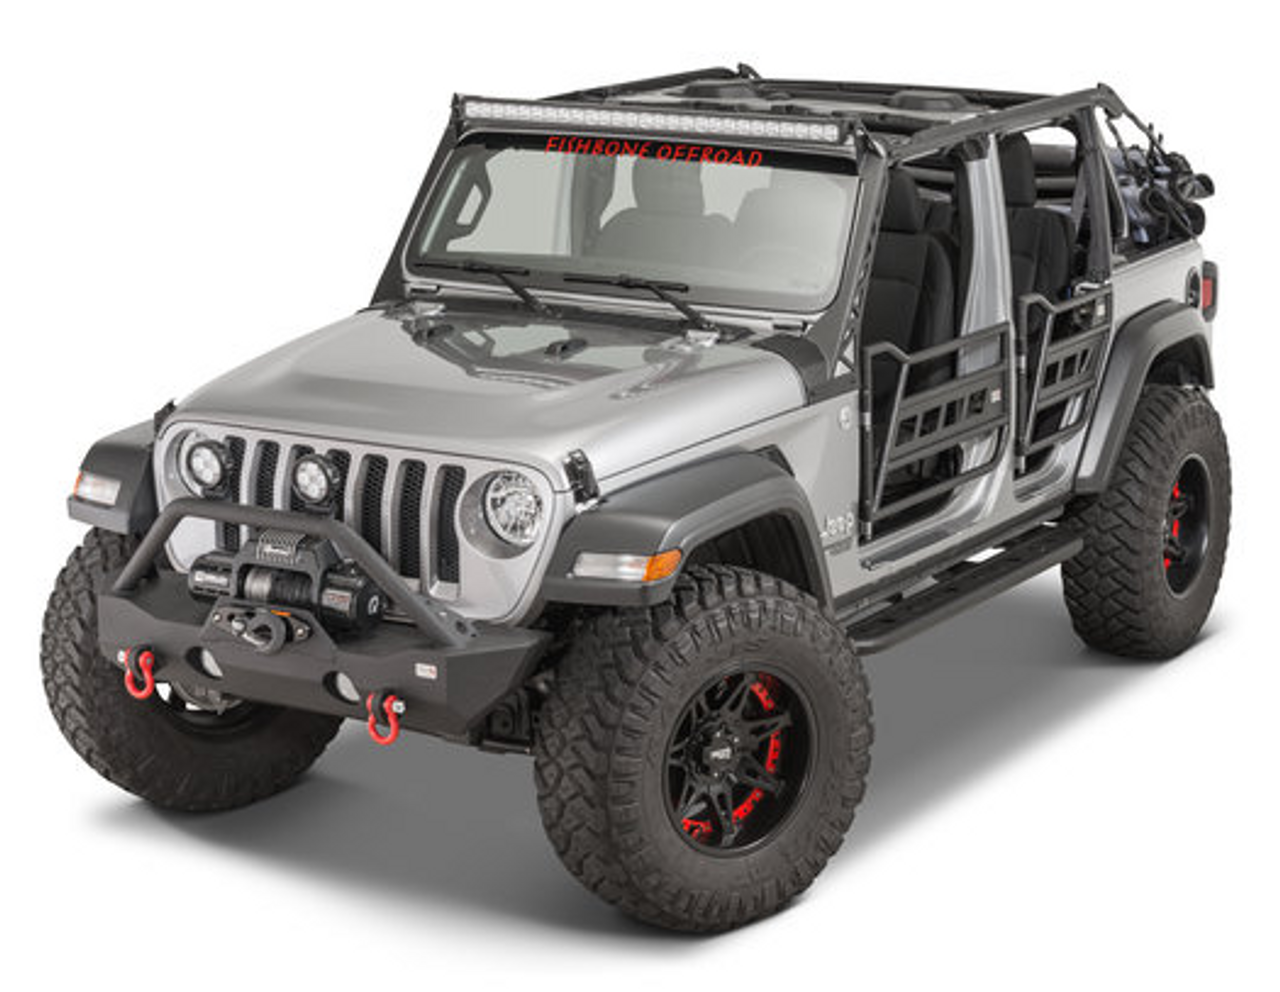 Fishbone Offroad FB22090 Mako Stubby Front Bumper for Jeep Wrangler JL 2018+